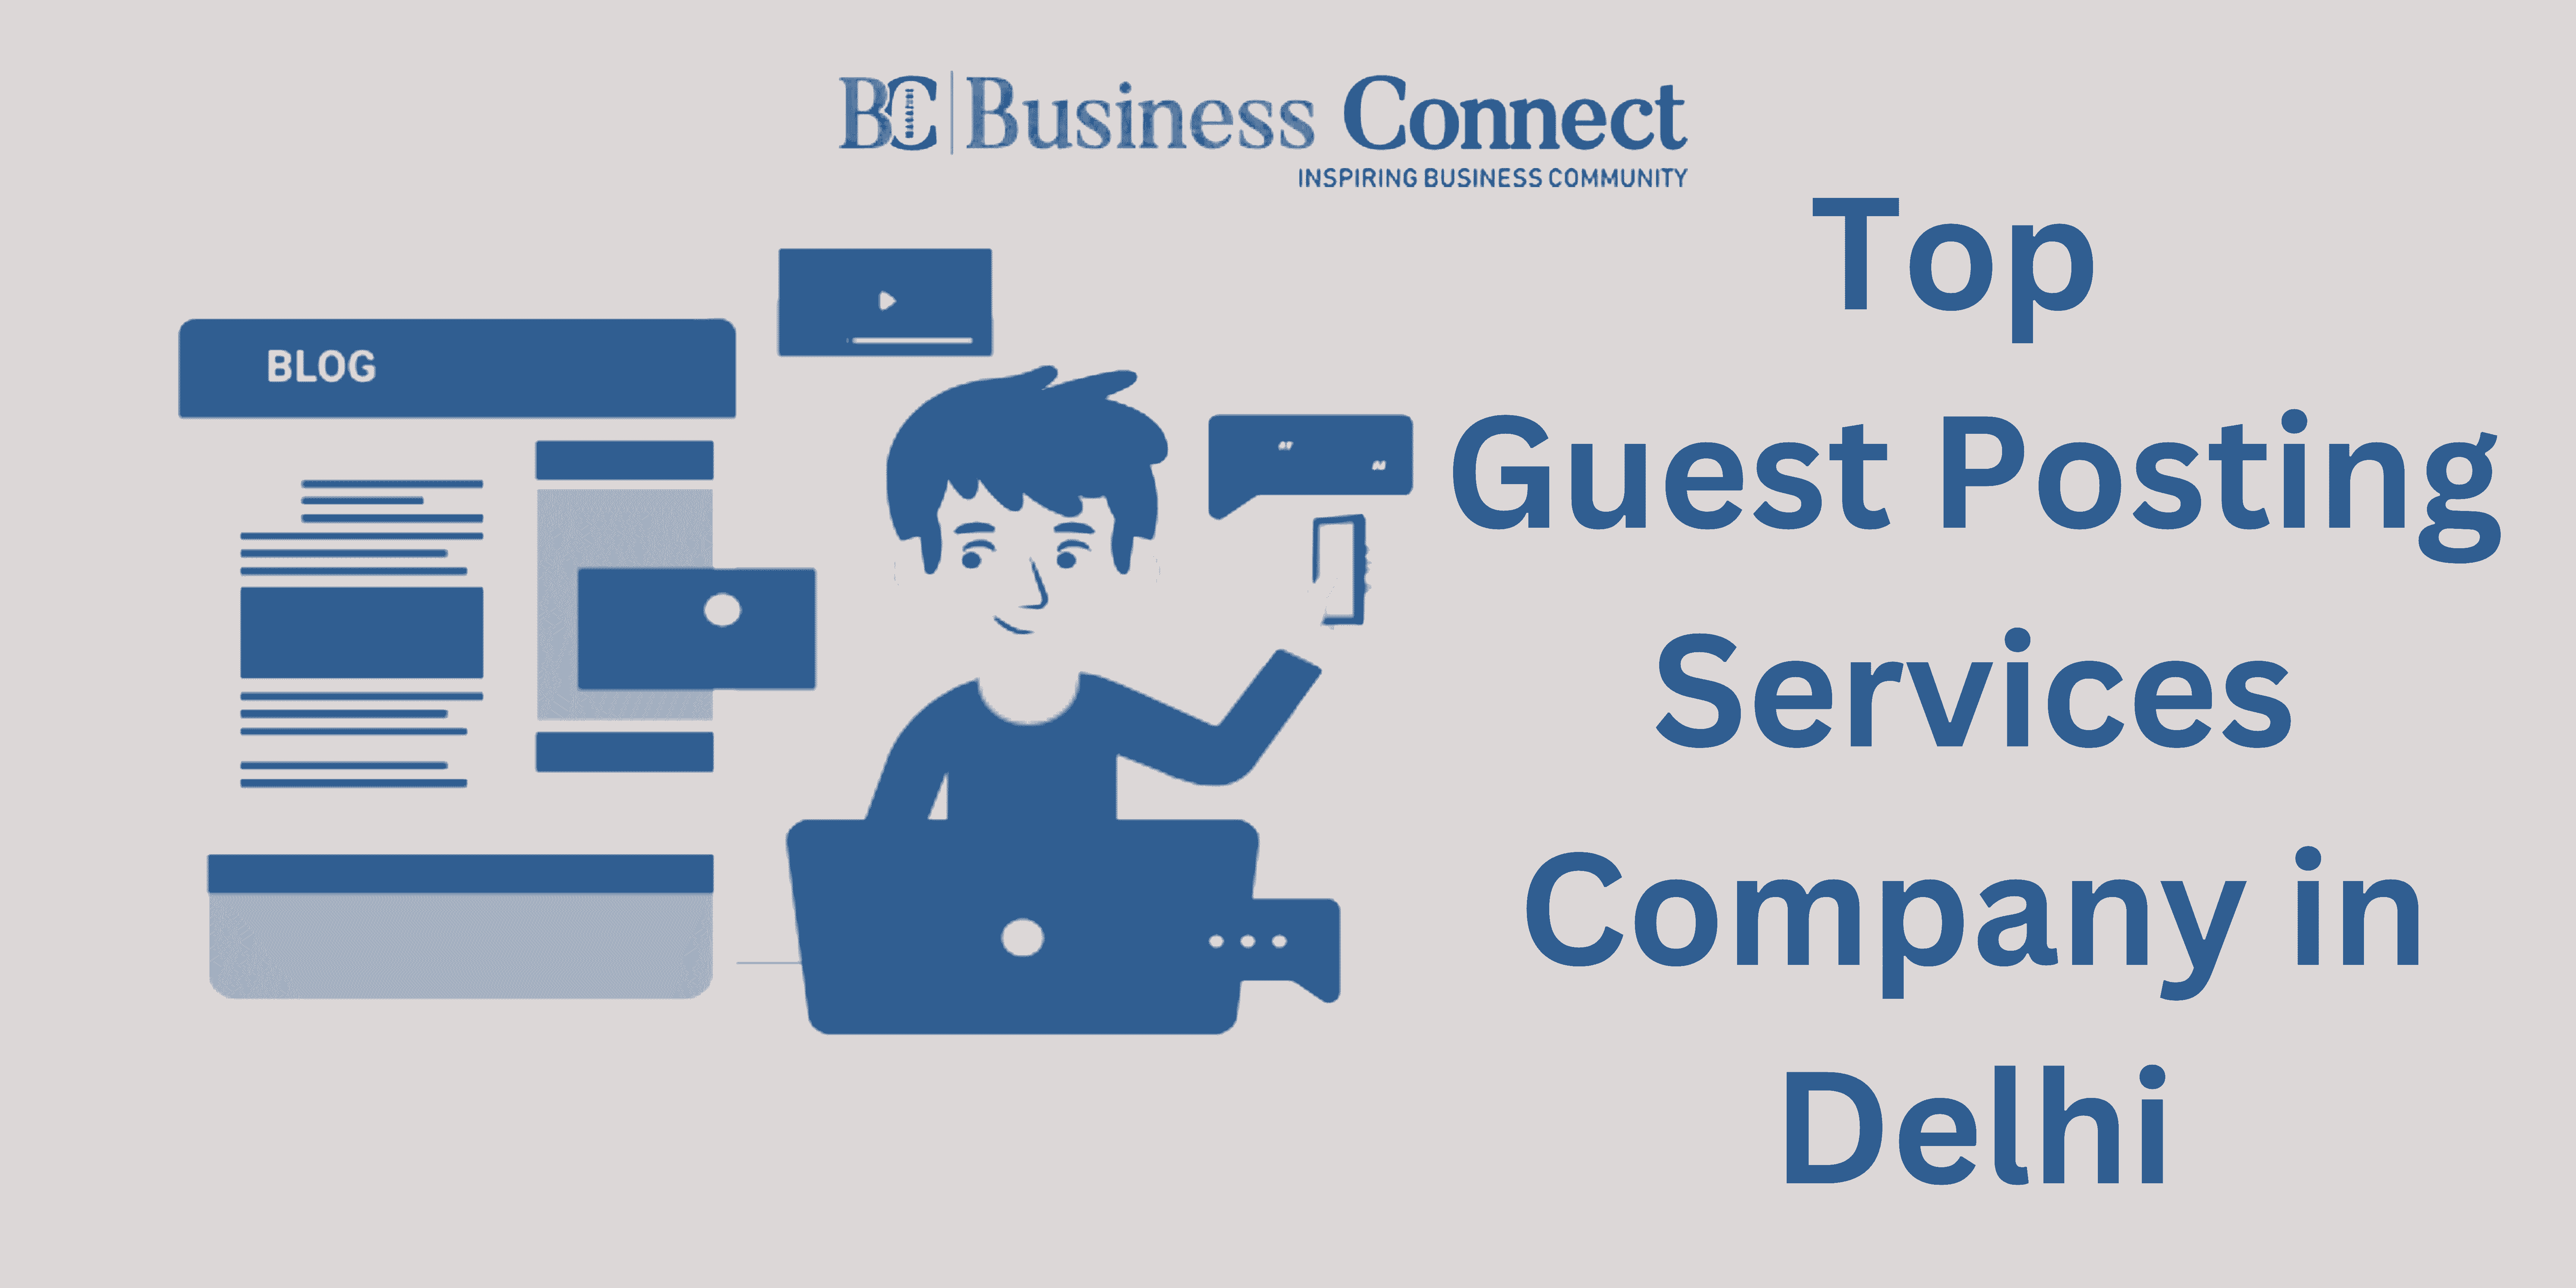 Top Guest Posting Services Company in Delhi